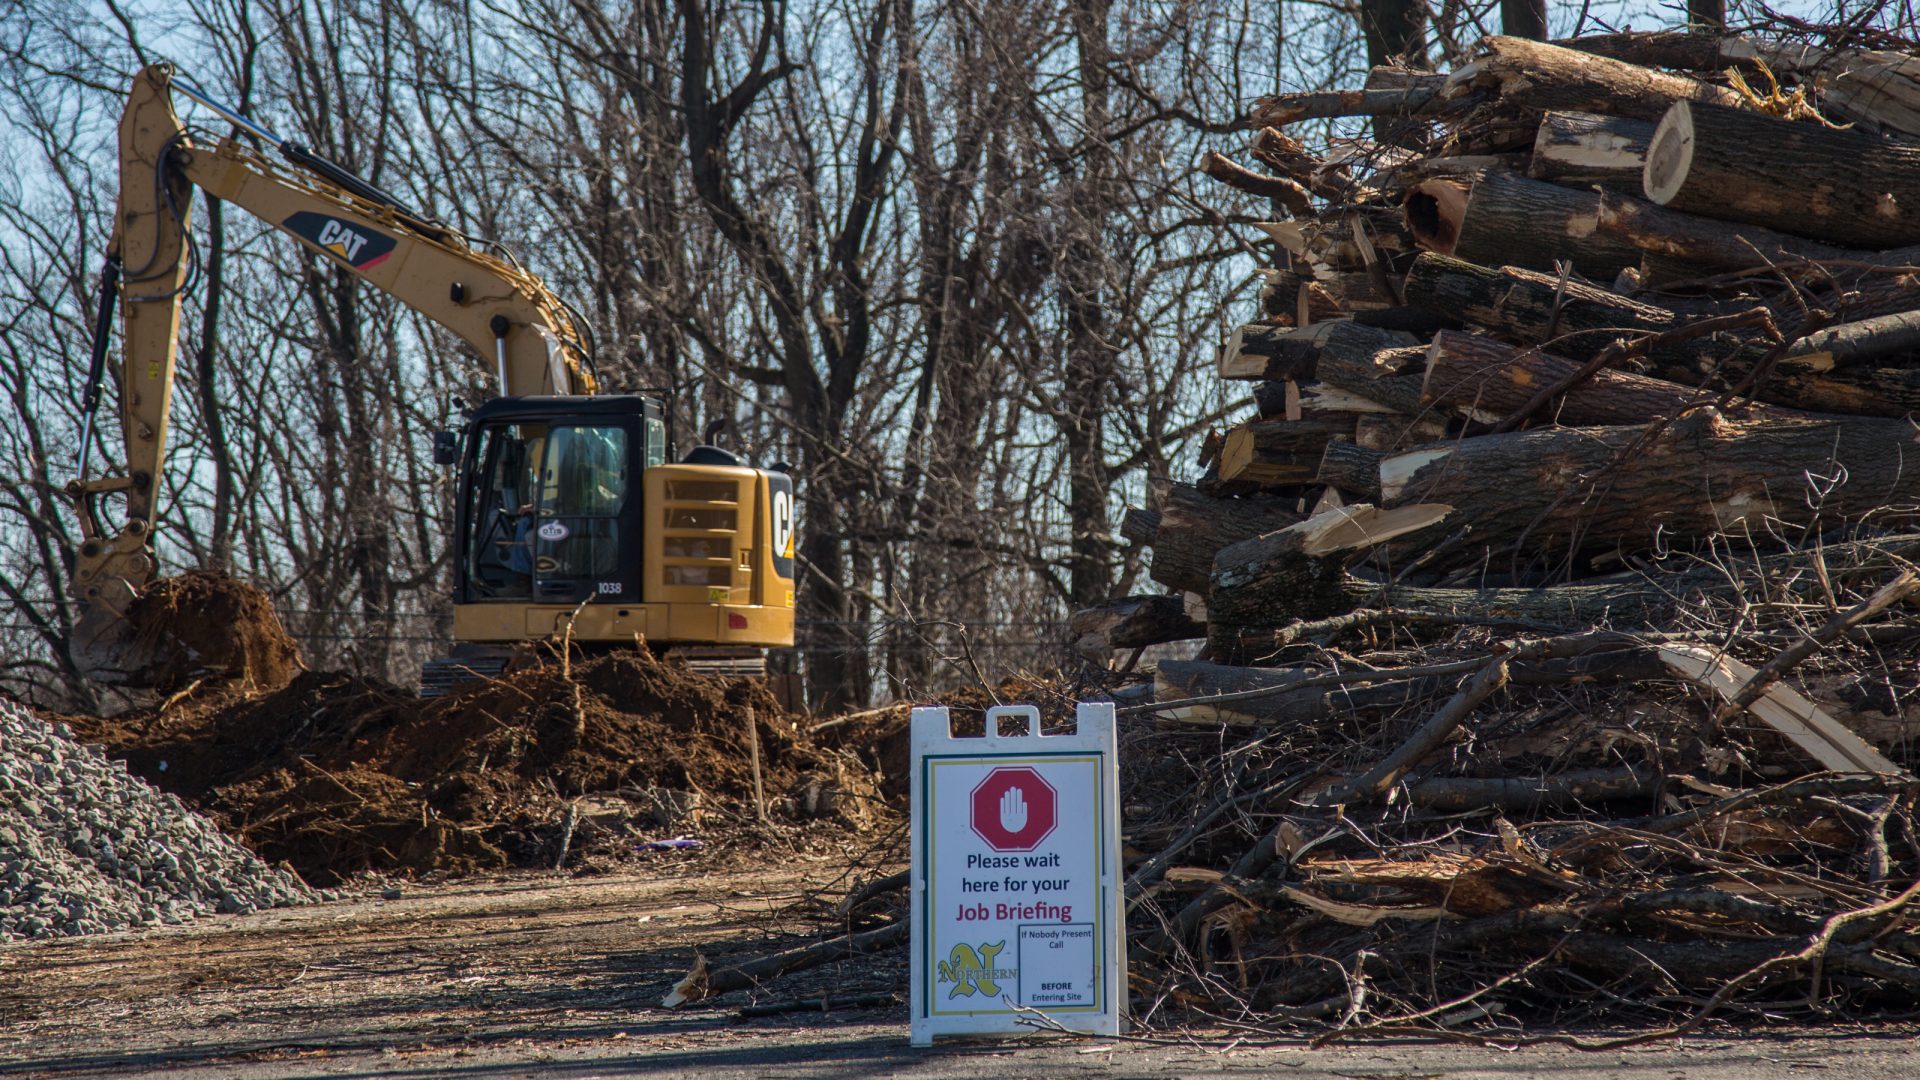 Tree-clearing in Delaware County in 2017 prepares land for the construction of the Mariner East 2 pipeline project. The builder, Sunoco Logistics, rejected an attempt by a township in neighboring Chester County to block the installation of a valve along the line. 